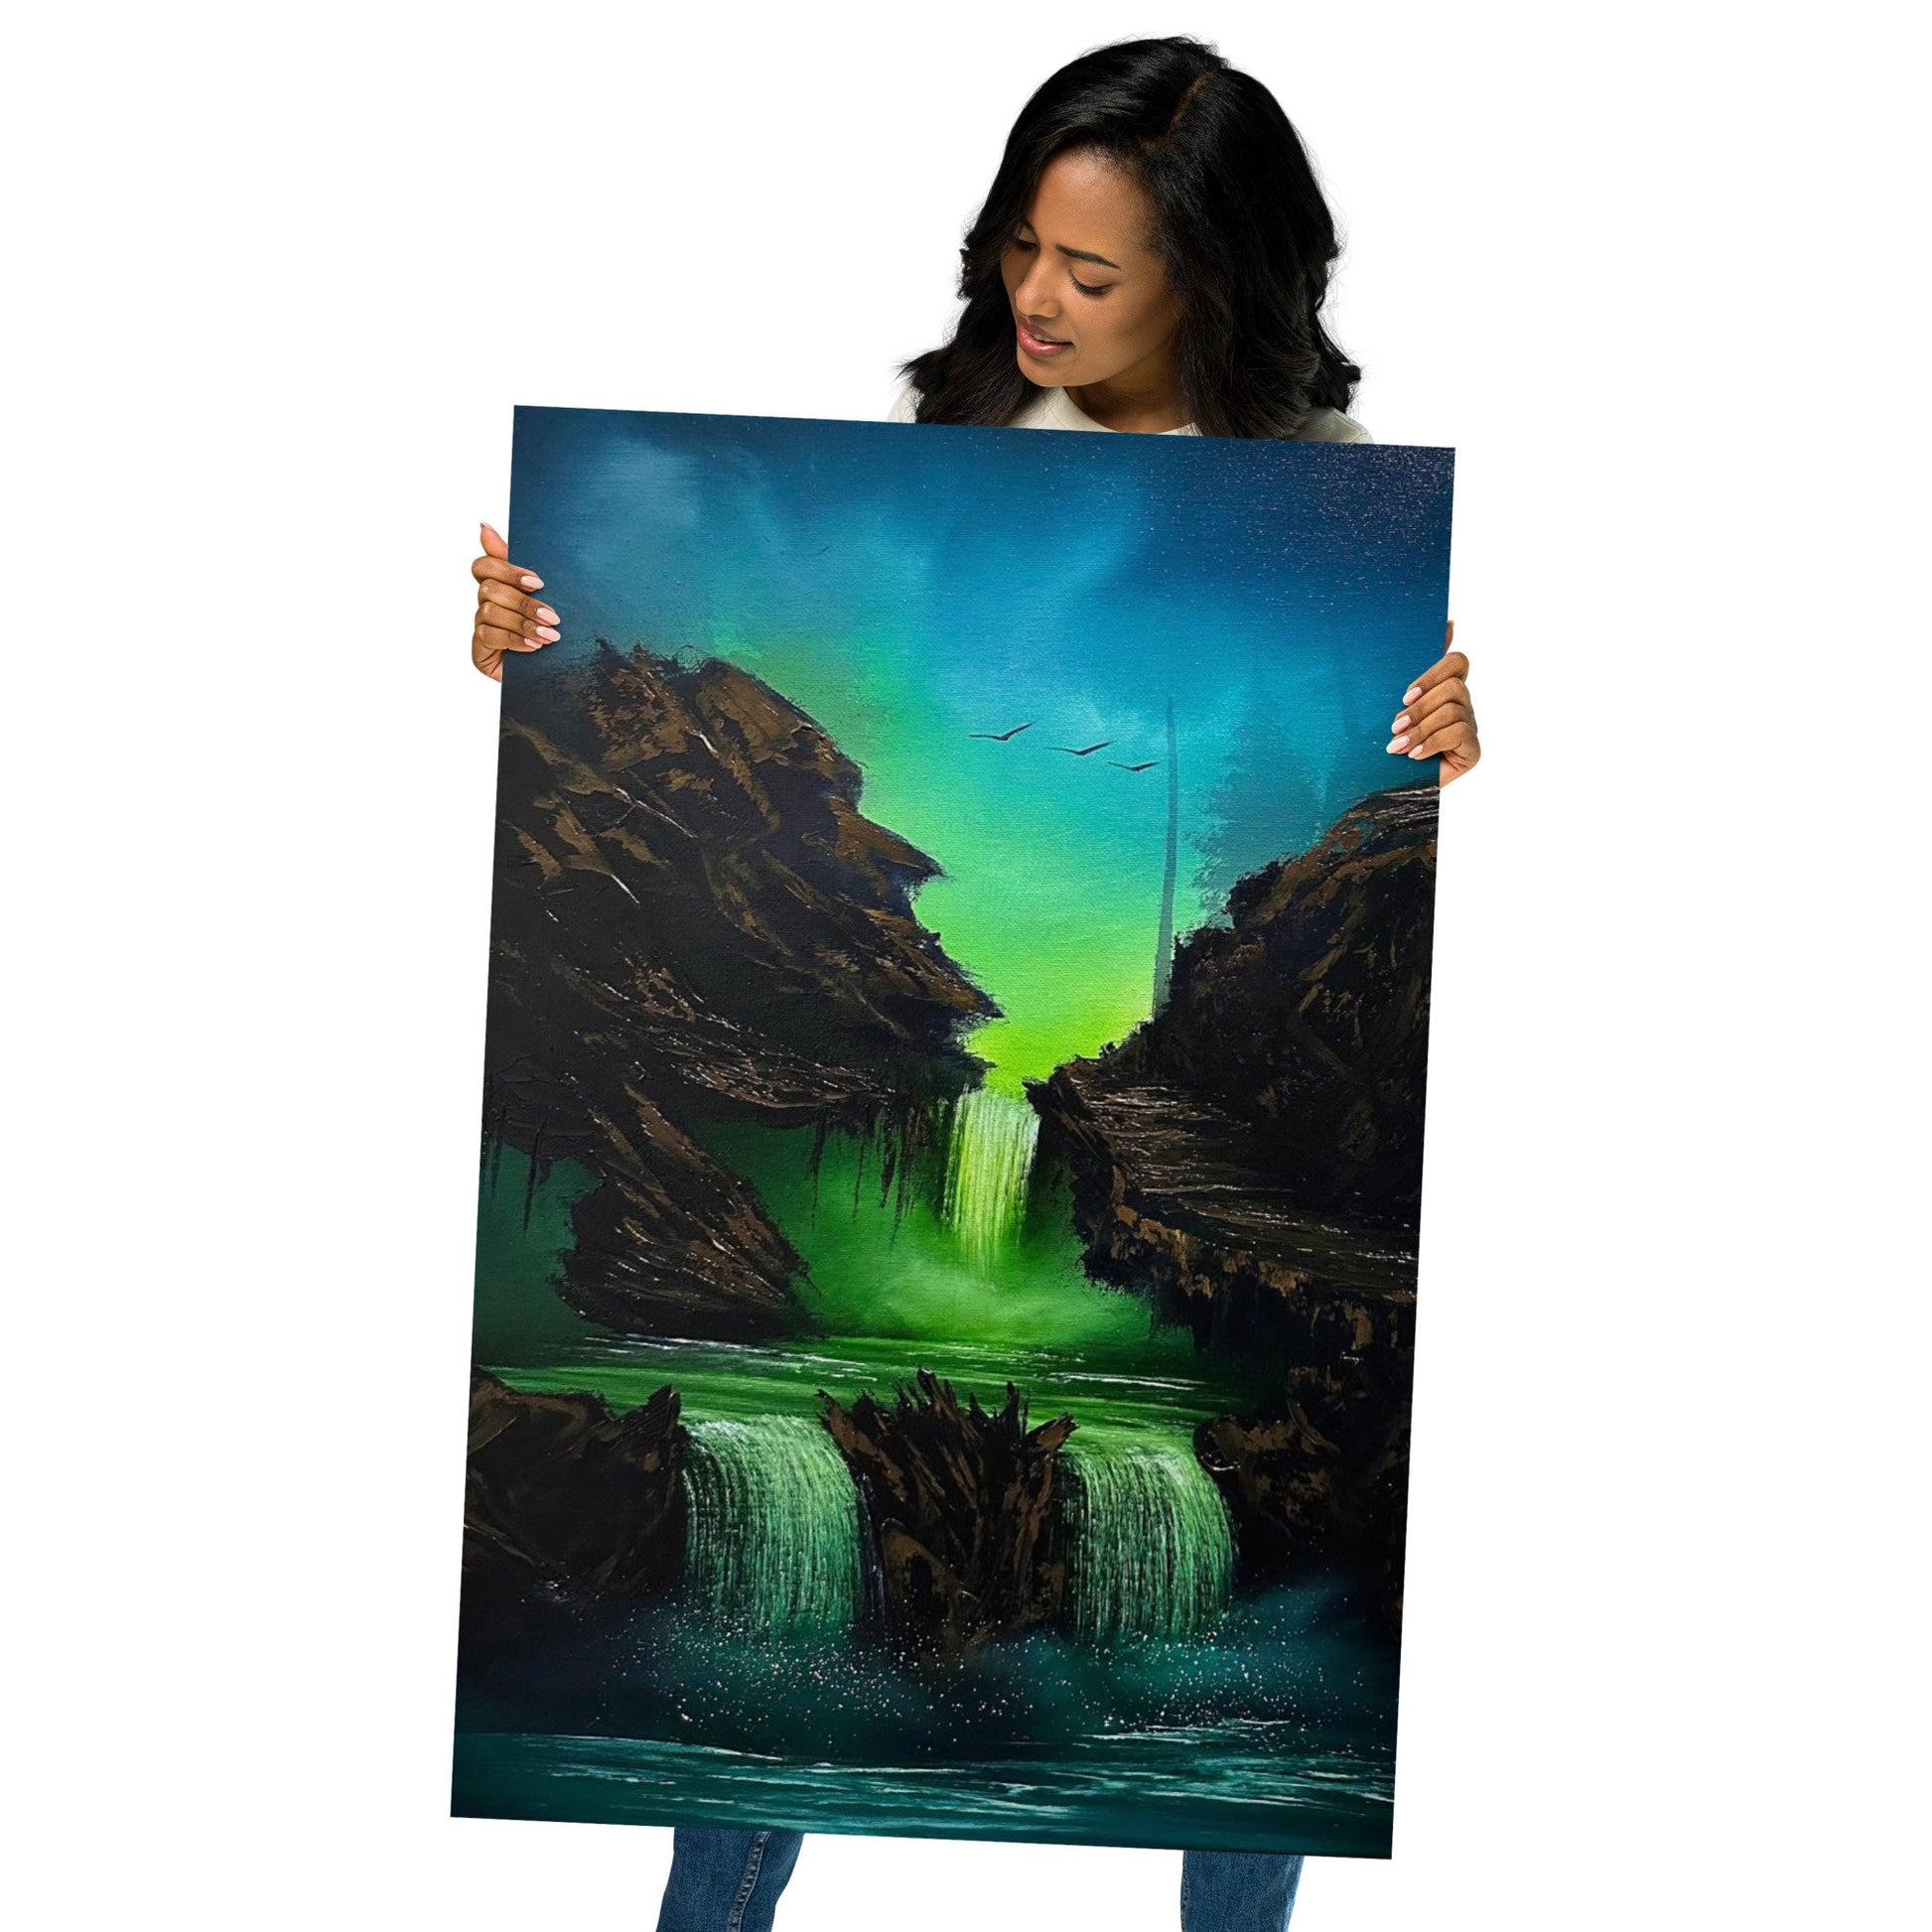 Poster Print - Blue Green Sky waterfall with rock face by PaintWithJosh